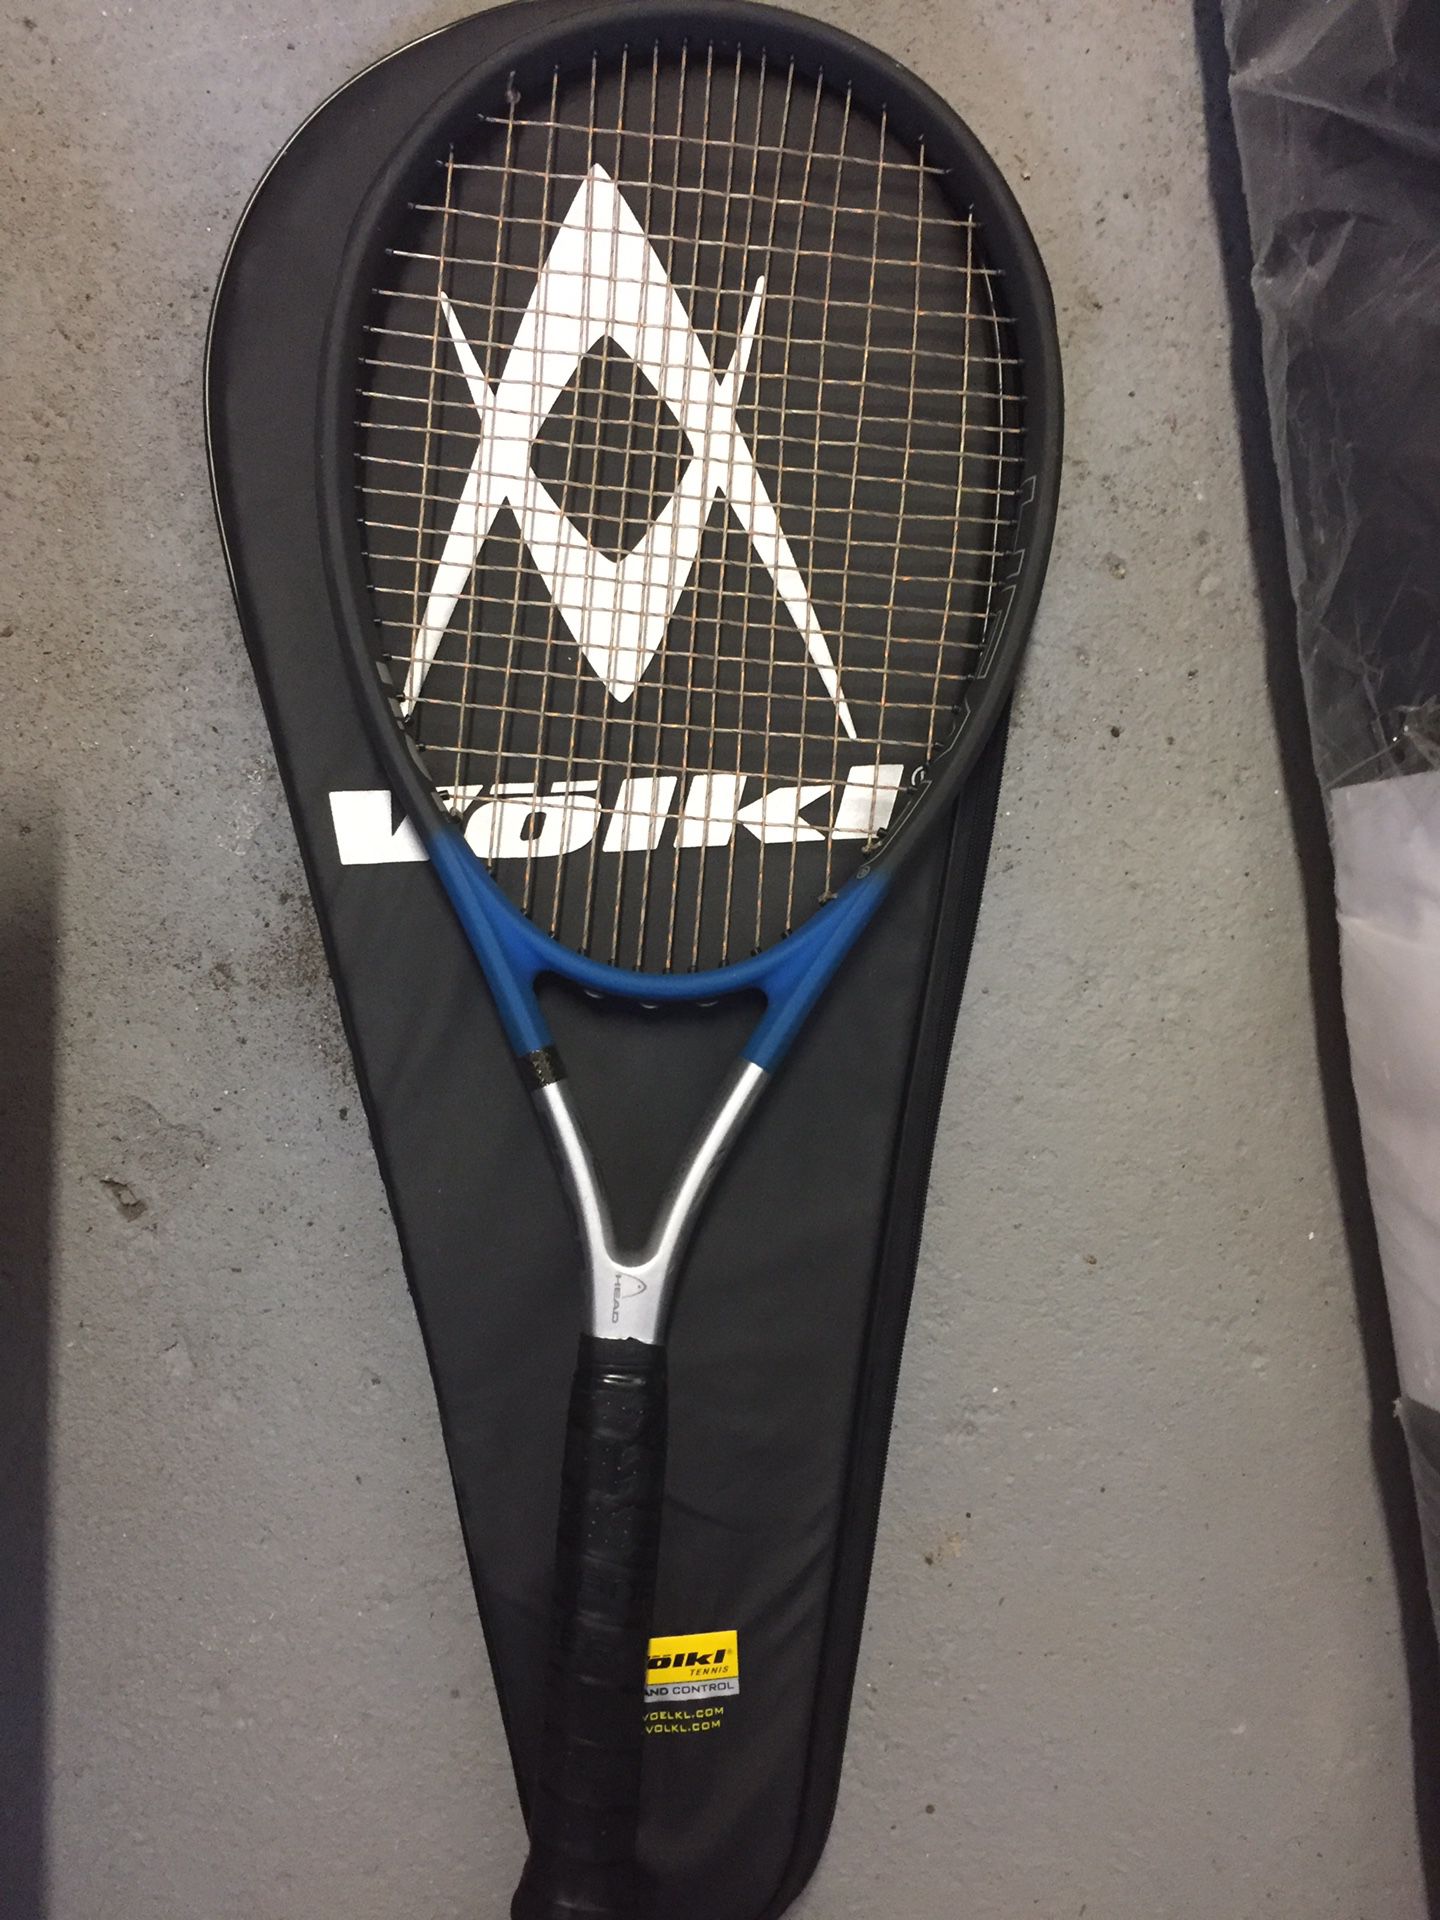 Tennis racket with case